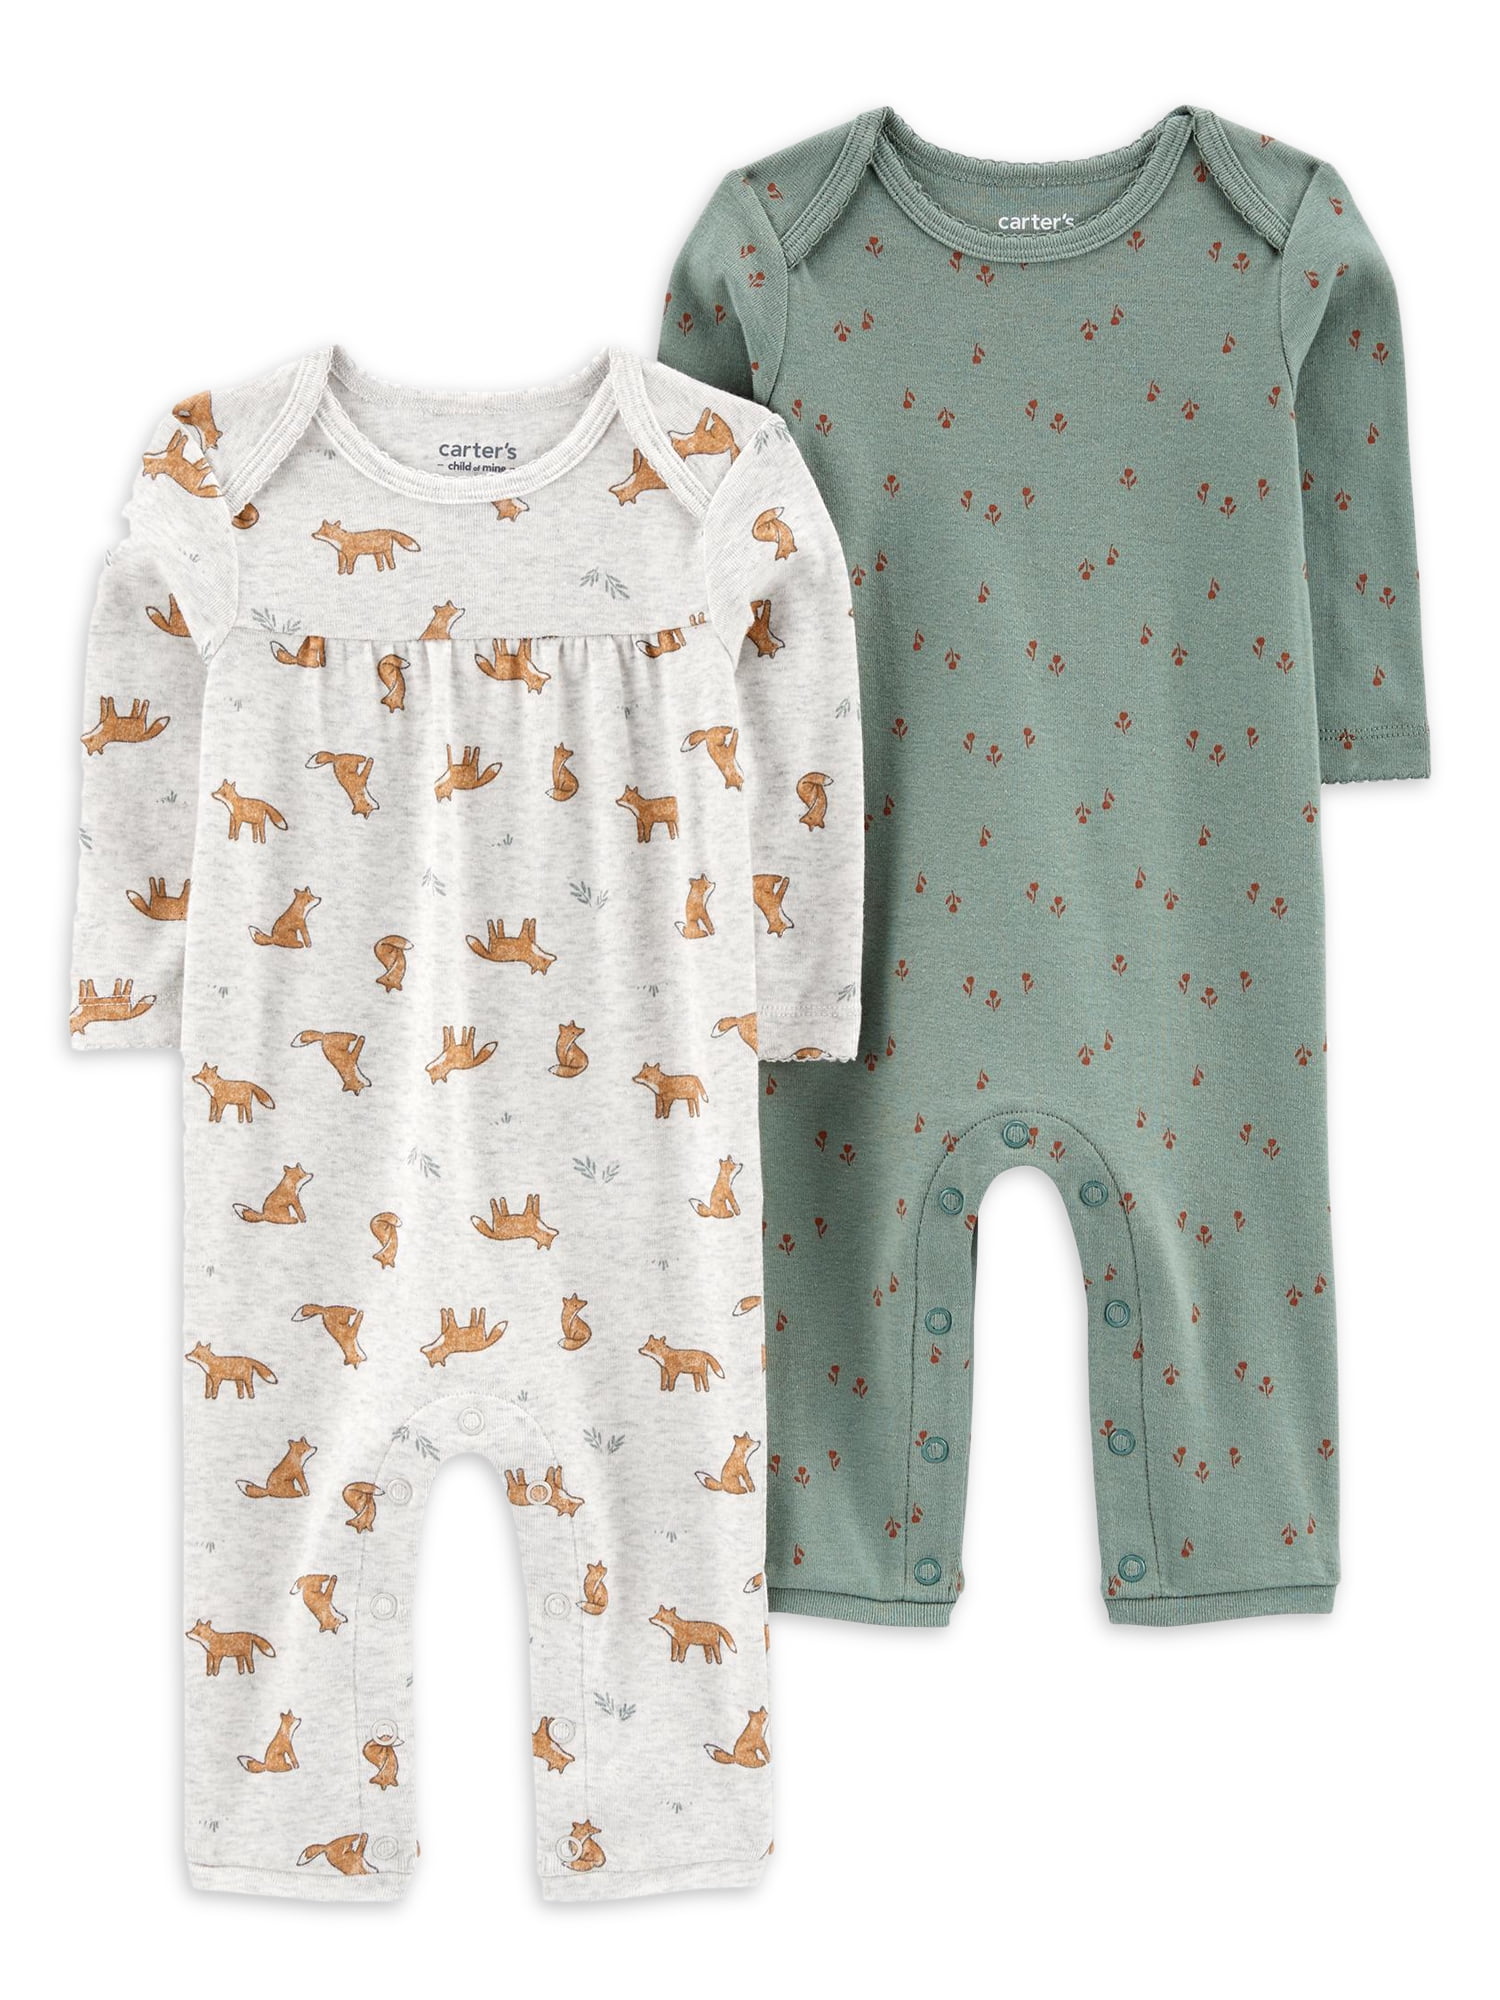 Carter's Child of Mine Baby Girl Jumpsuit, 2-Pack, One-Piece, Sizes ...